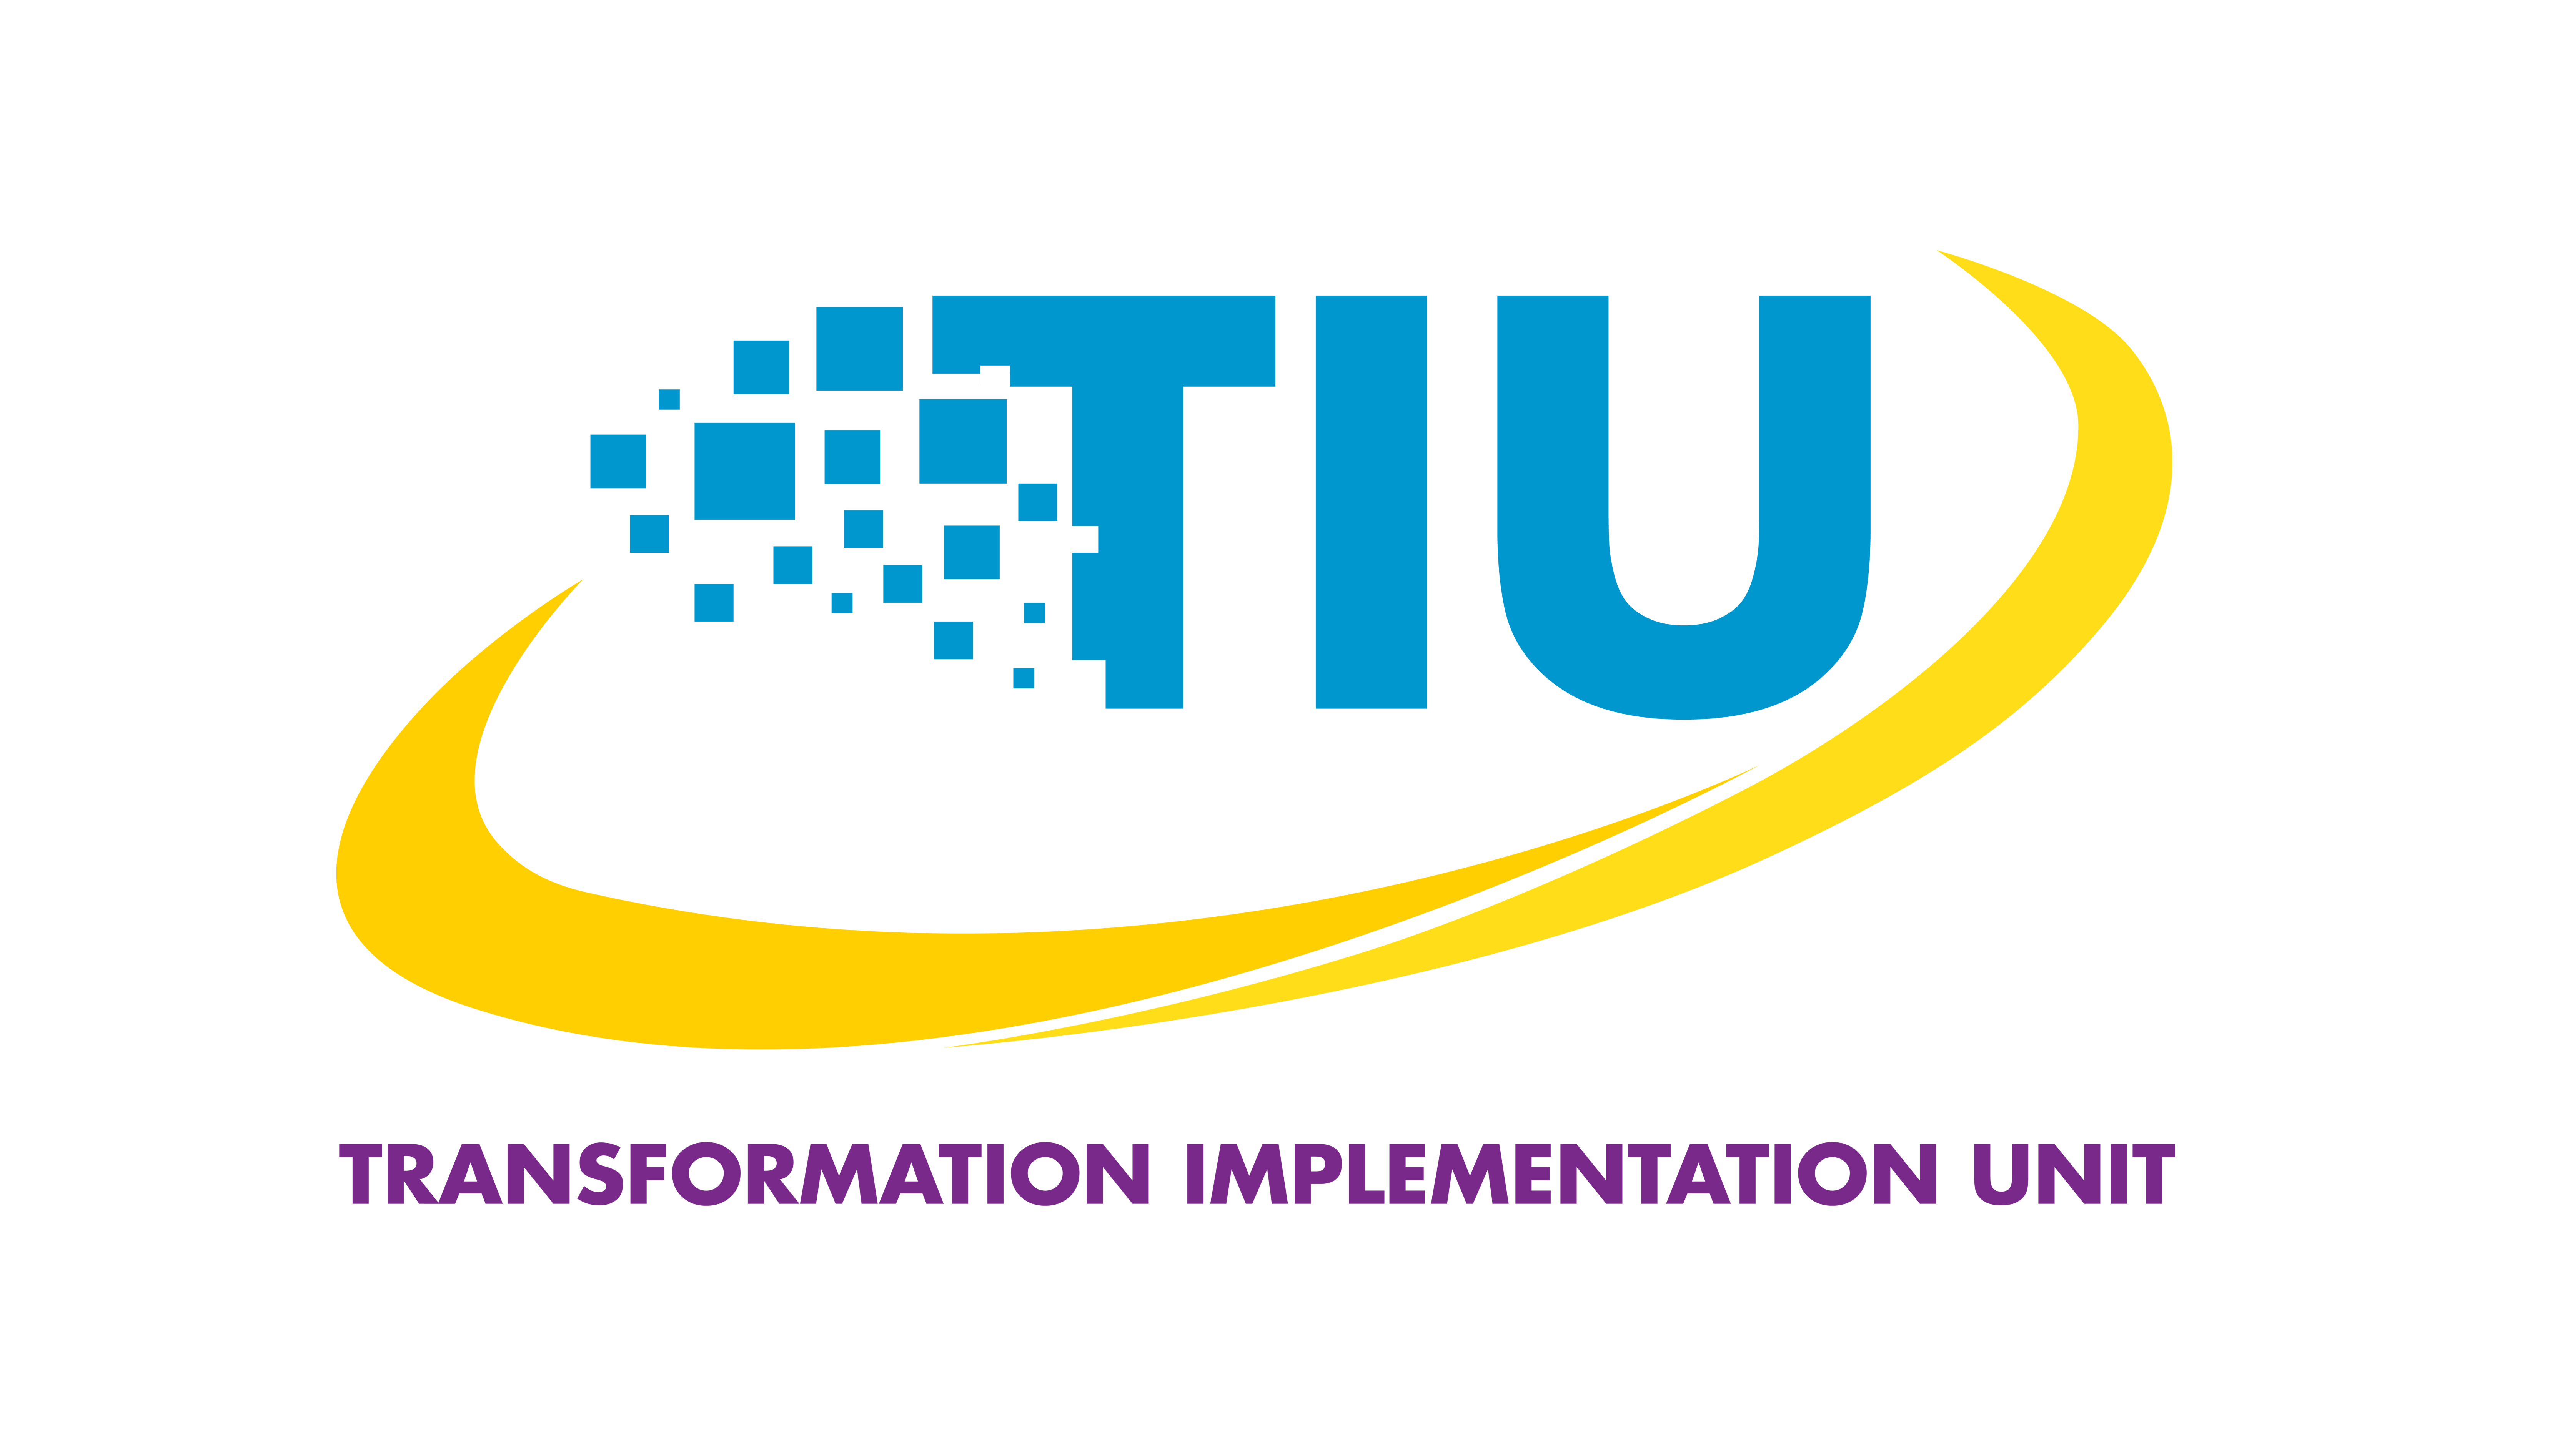 Transformation Implementation Unit – A Year in Review